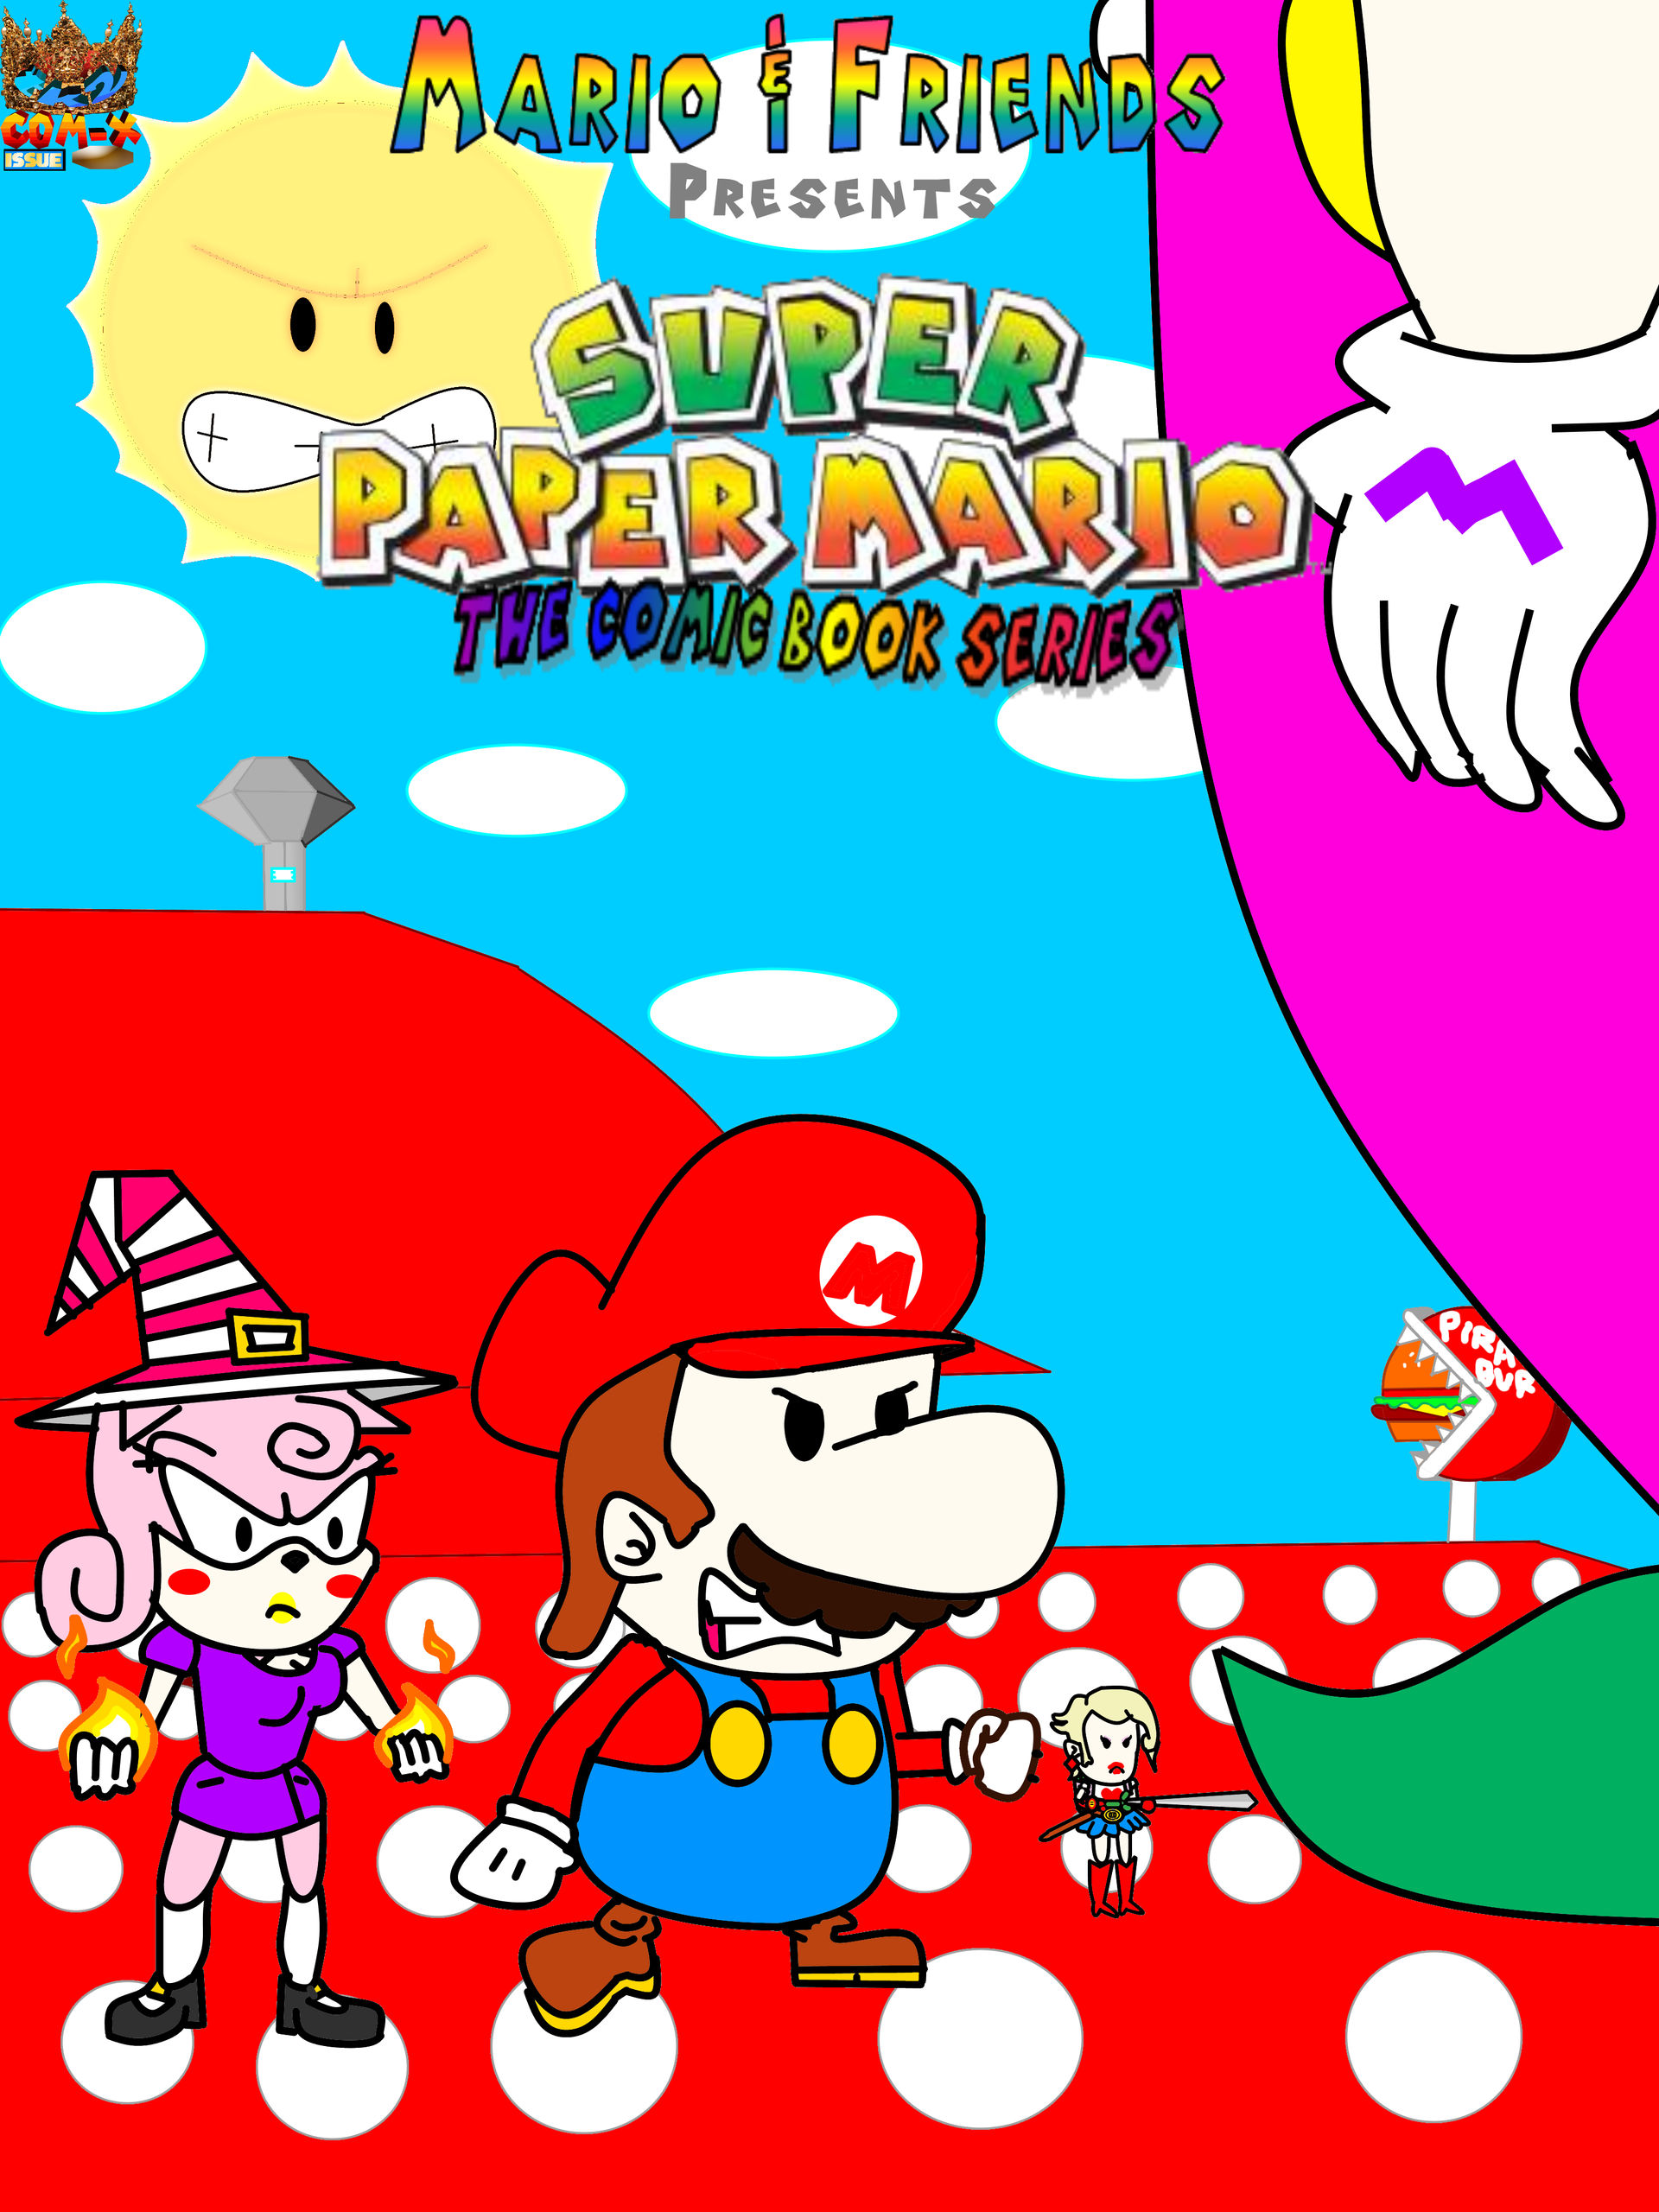 Super Paper Mario Comic issue 1 by ToonKing2 on DeviantArt